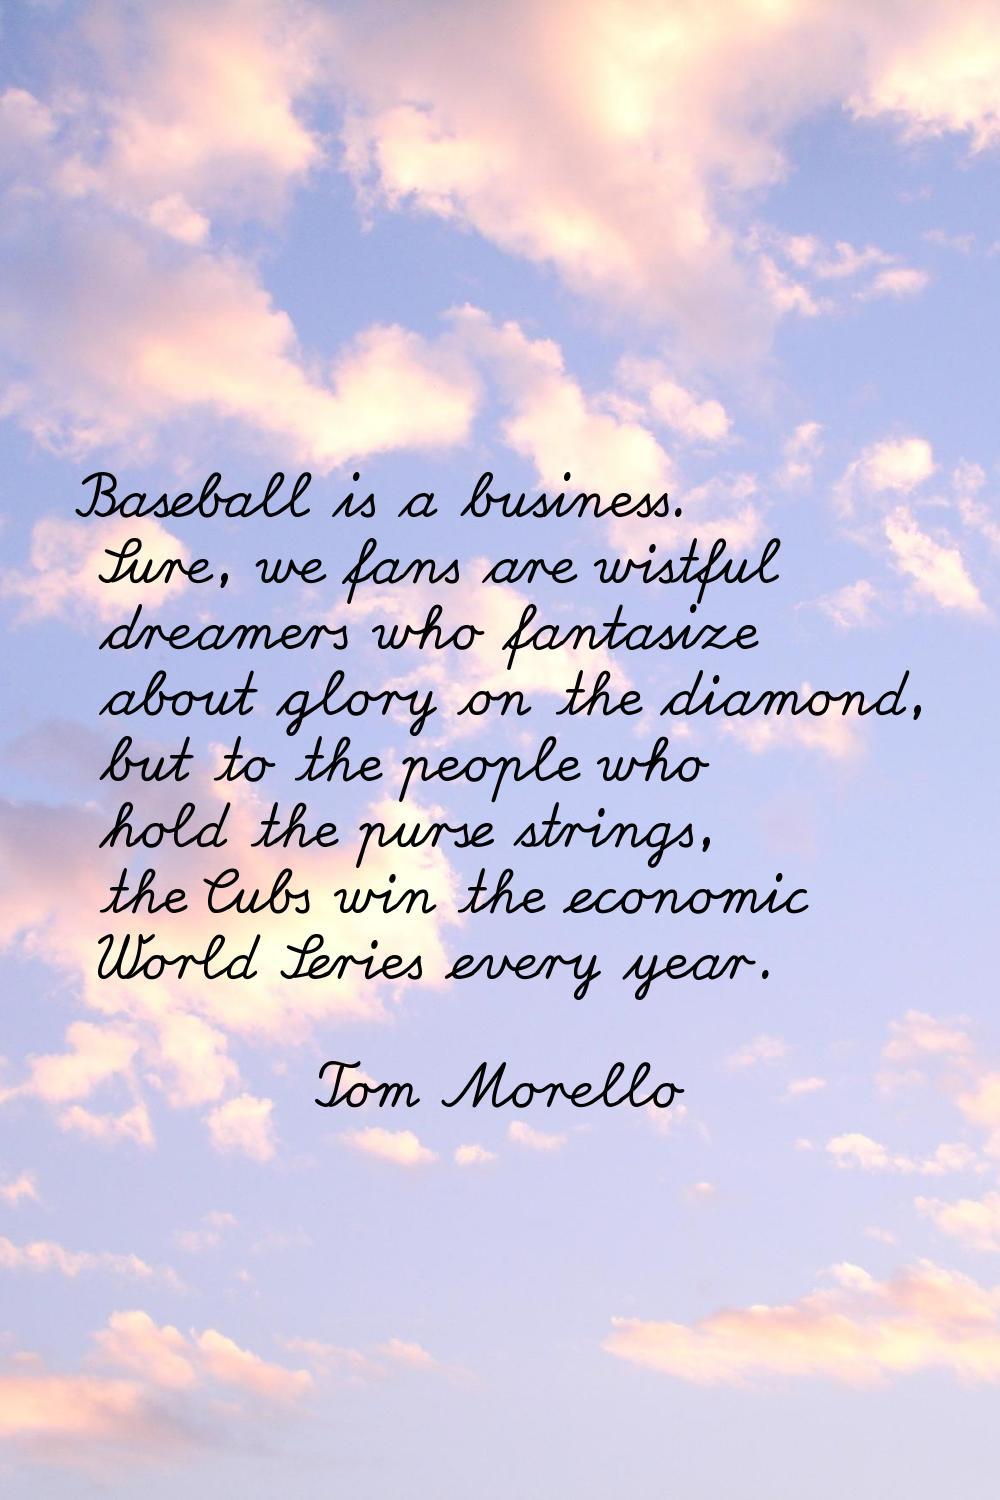 Baseball is a business. Sure, we fans are wistful dreamers who fantasize about glory on the diamond